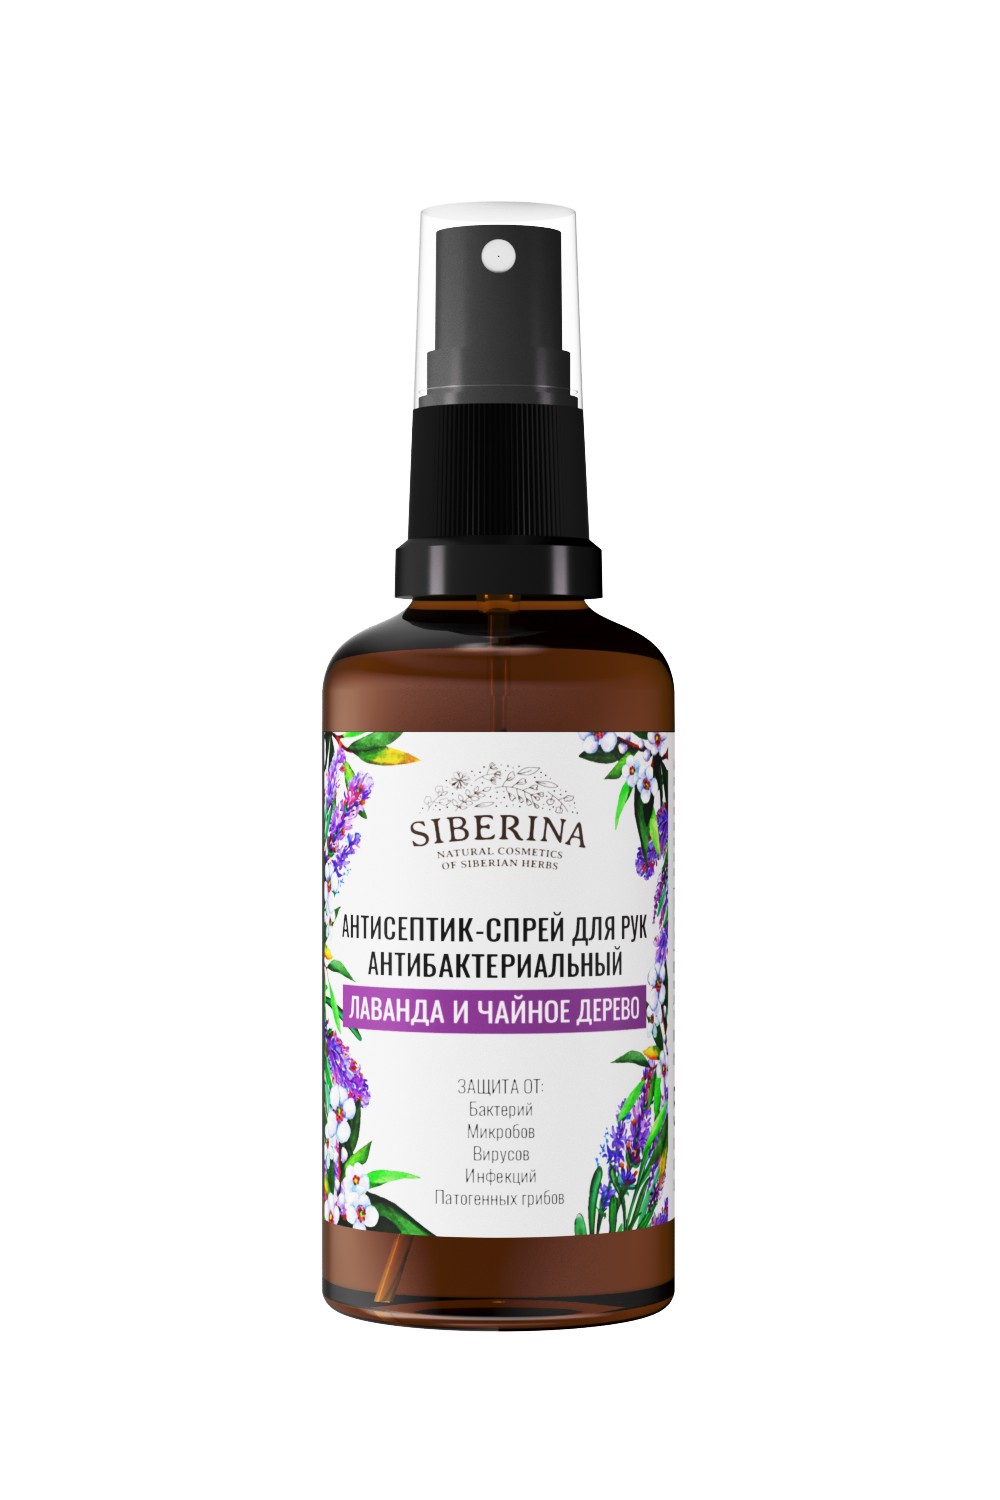 ANTISEPTIC SPRAY FOR HANDS ANTI-BACTERIAL LAVENDER AND TEA TREE